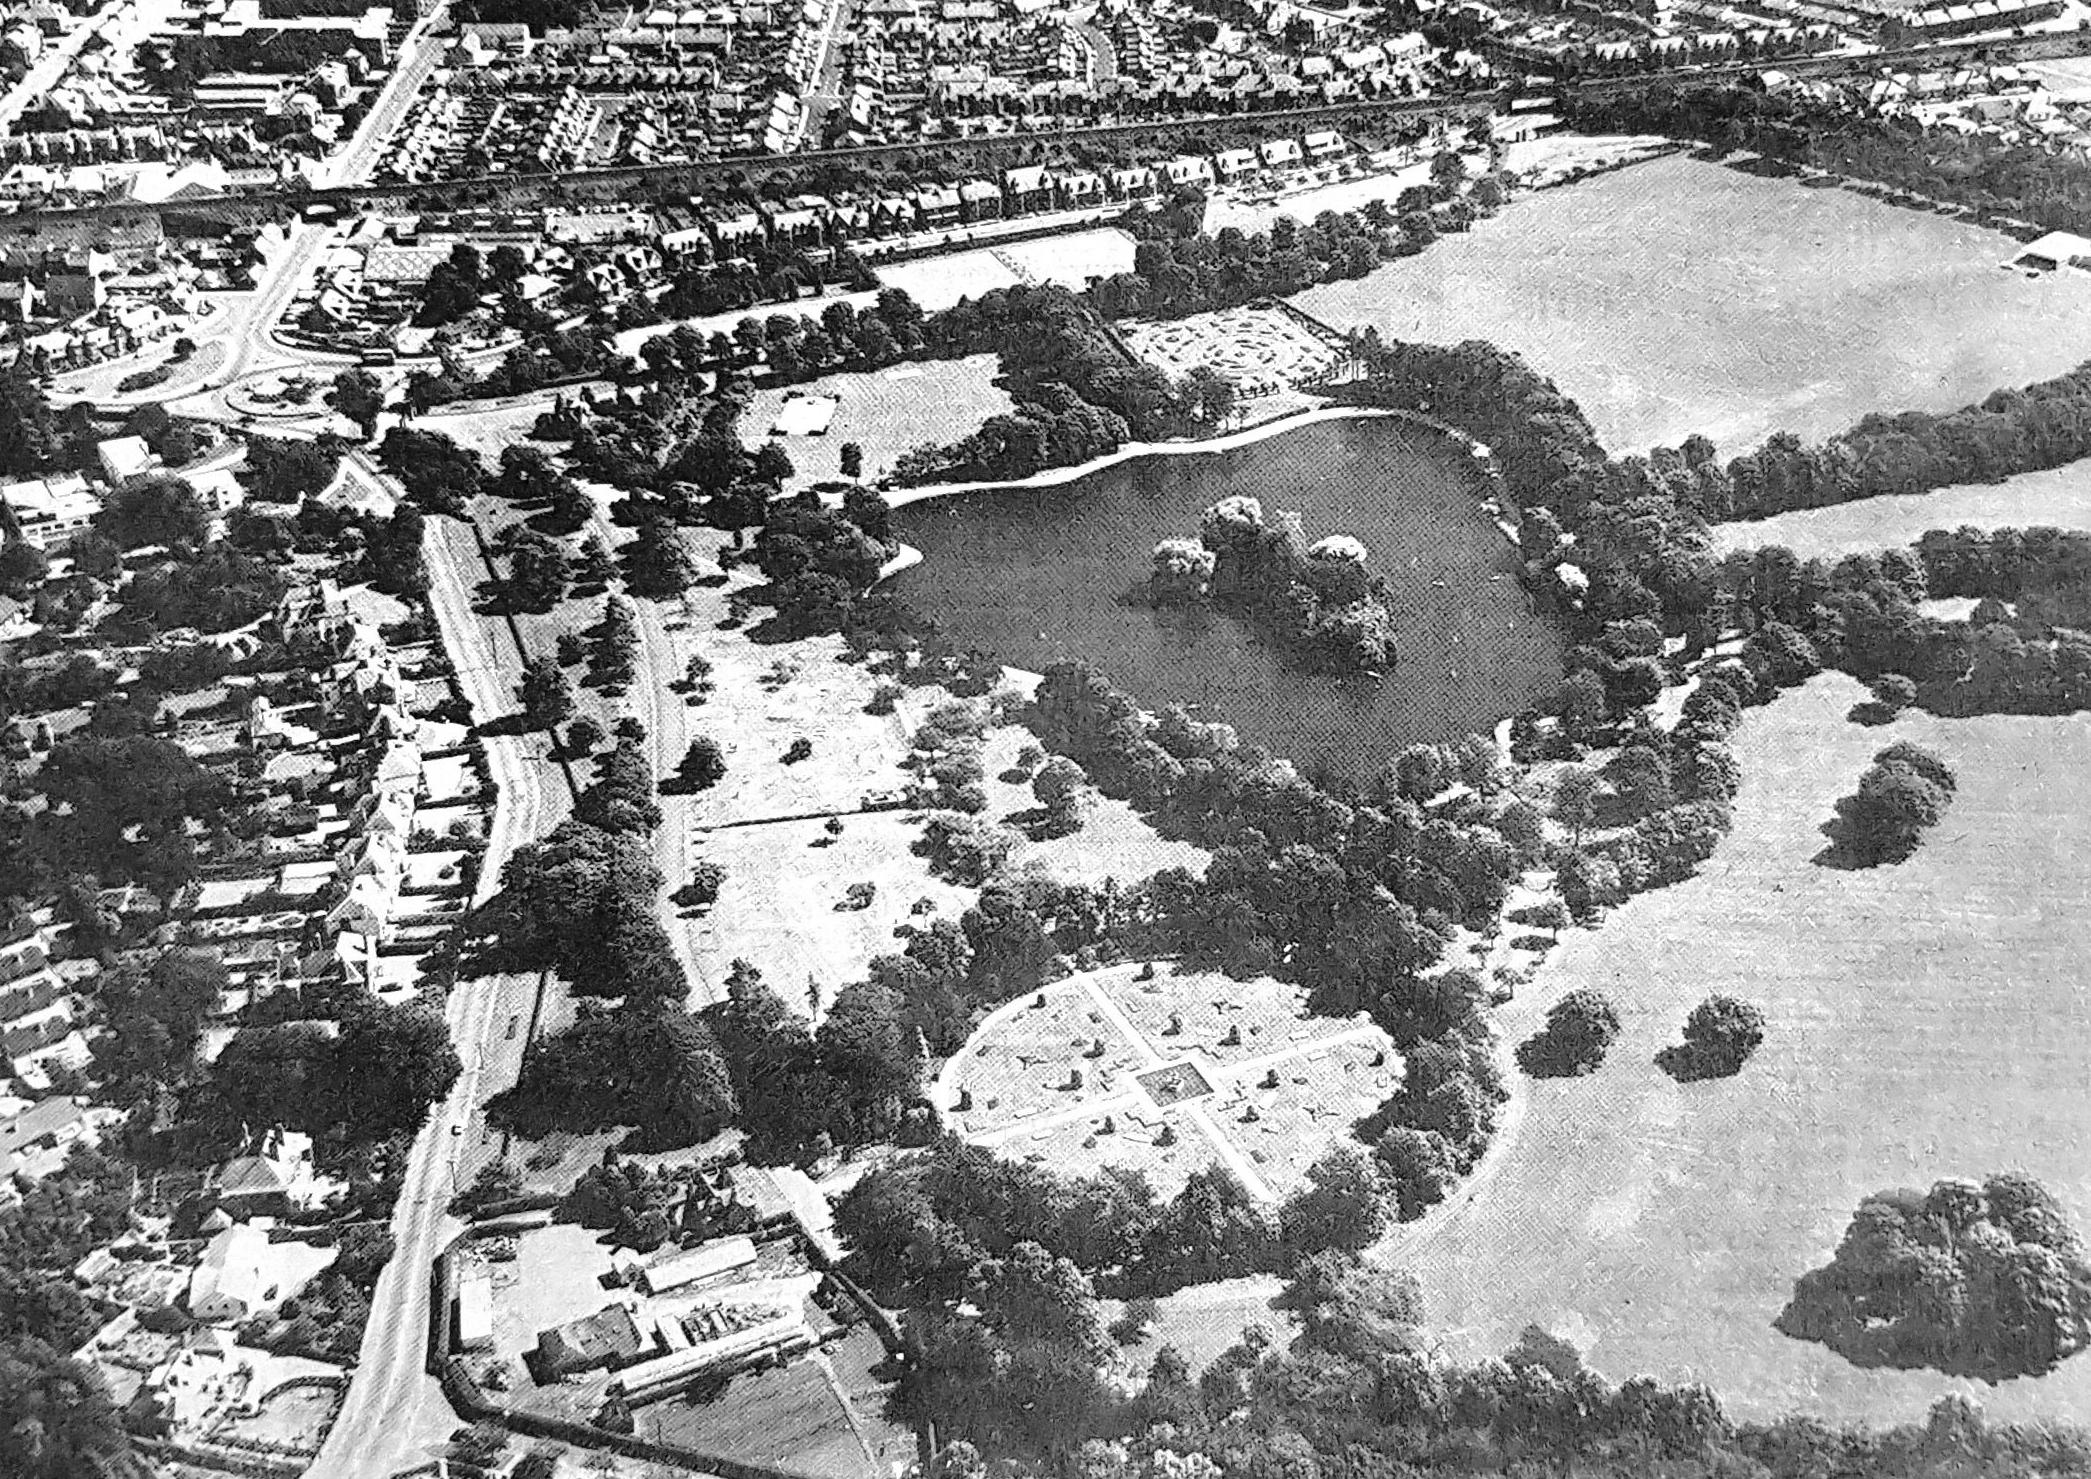 Another view of Beveridge Park with the boating pond prominent.